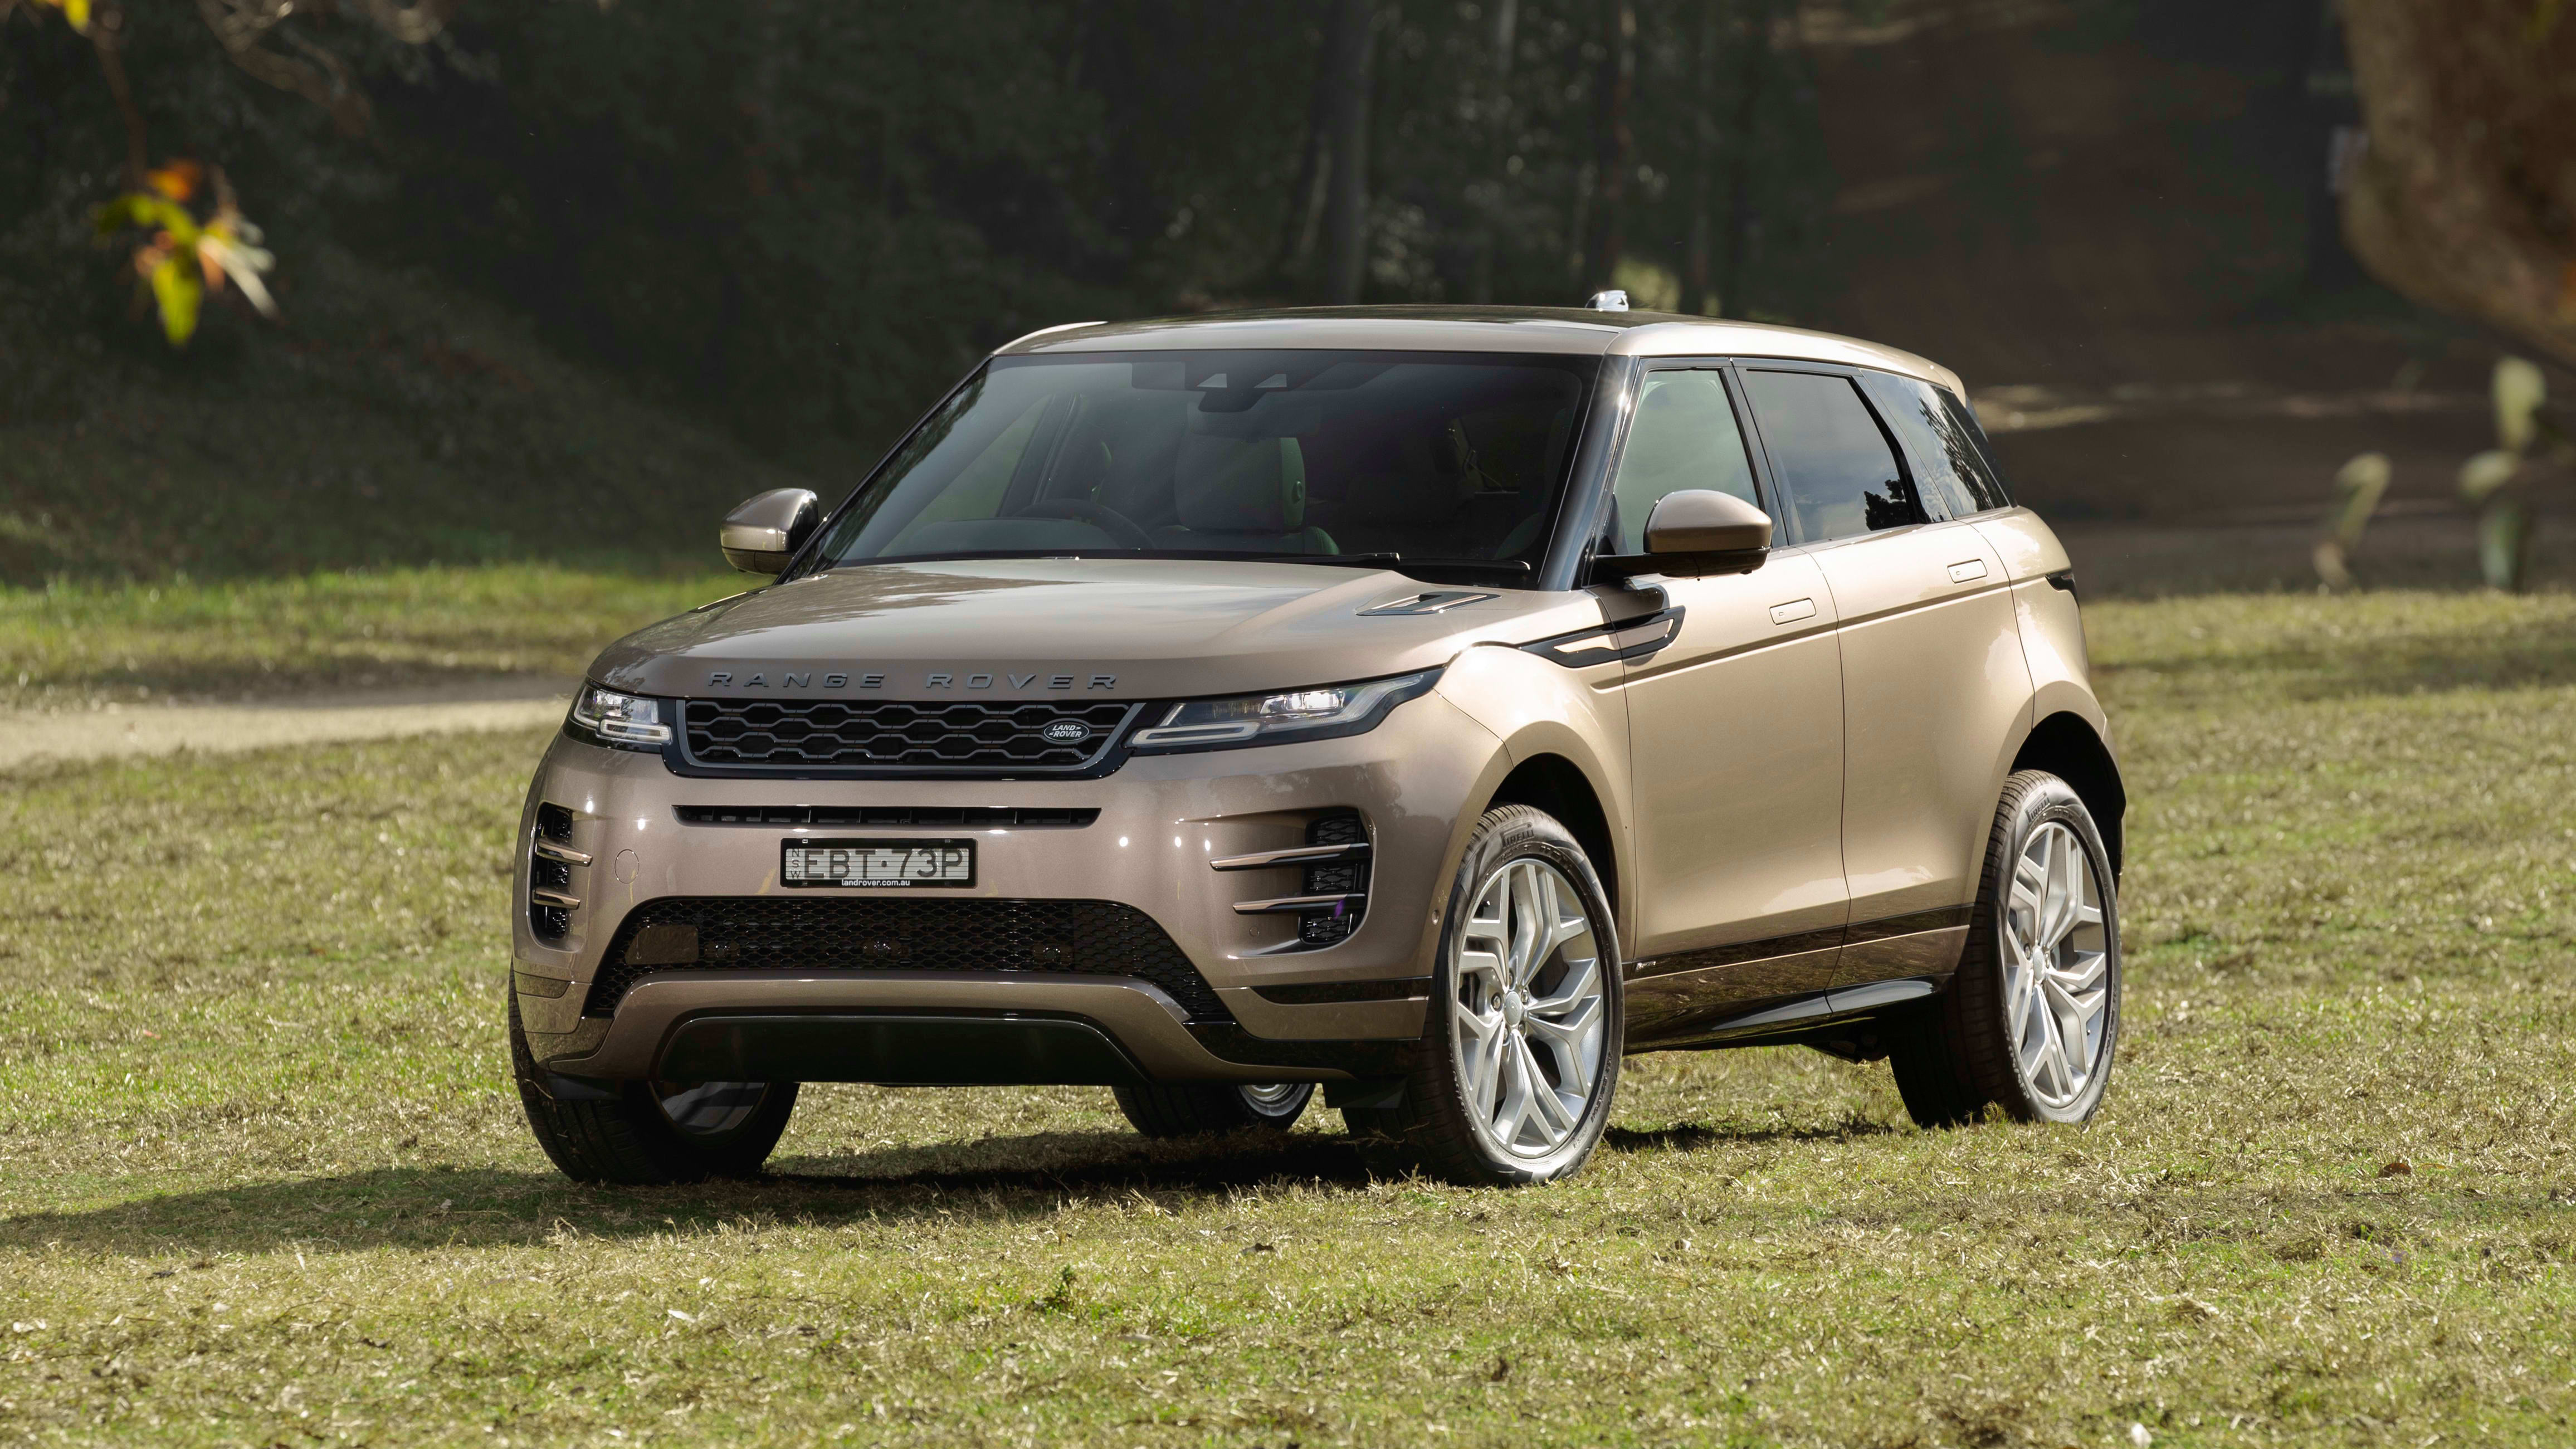 Land Rover New Car Reviews, News, Models & Prices - Drive